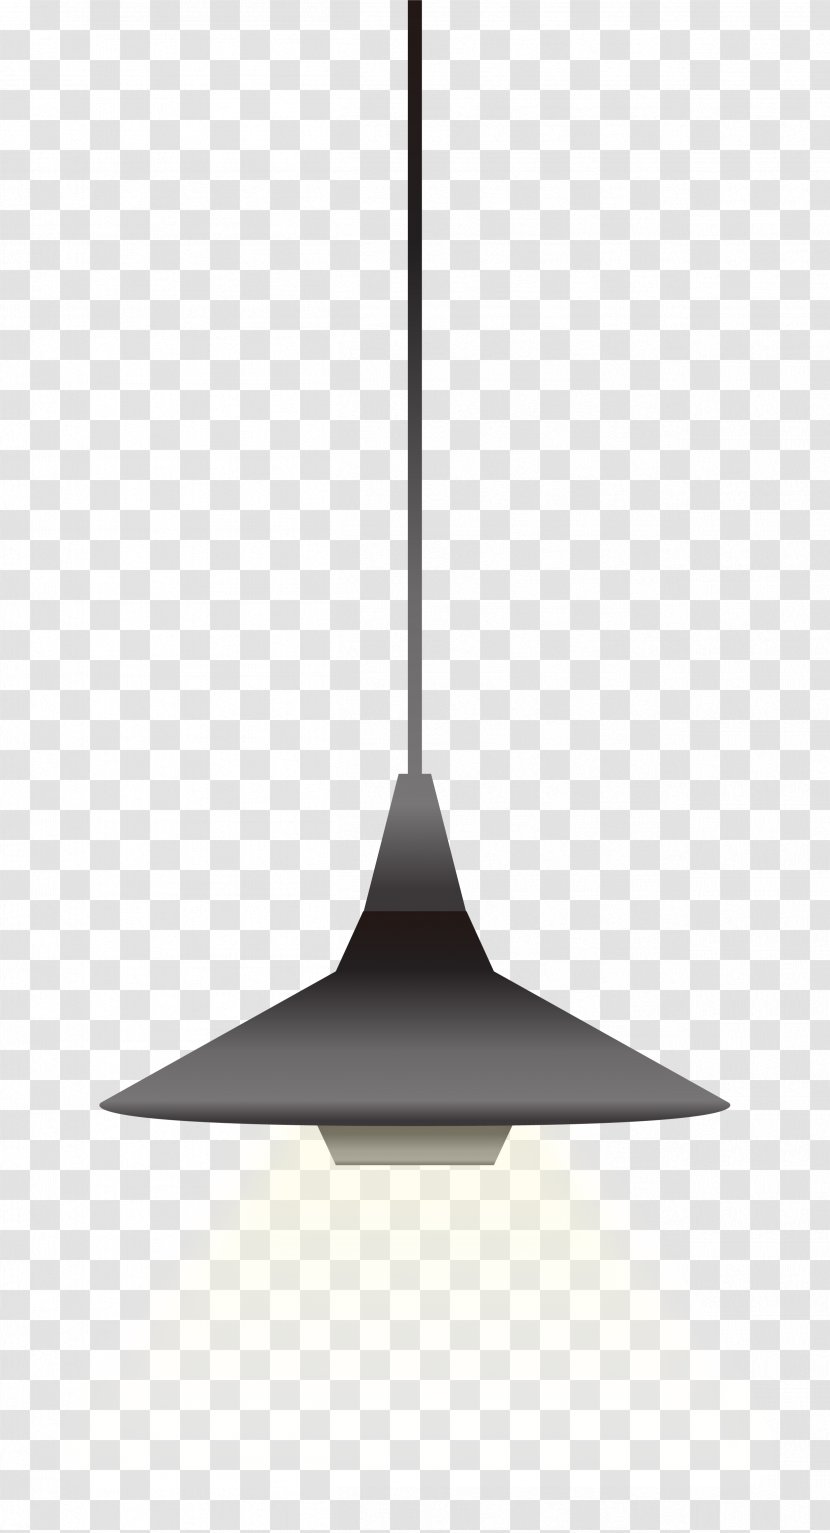 Triangle Pattern - Hand Drawn Gray Pendant Lamp Bulb Transparent PNG